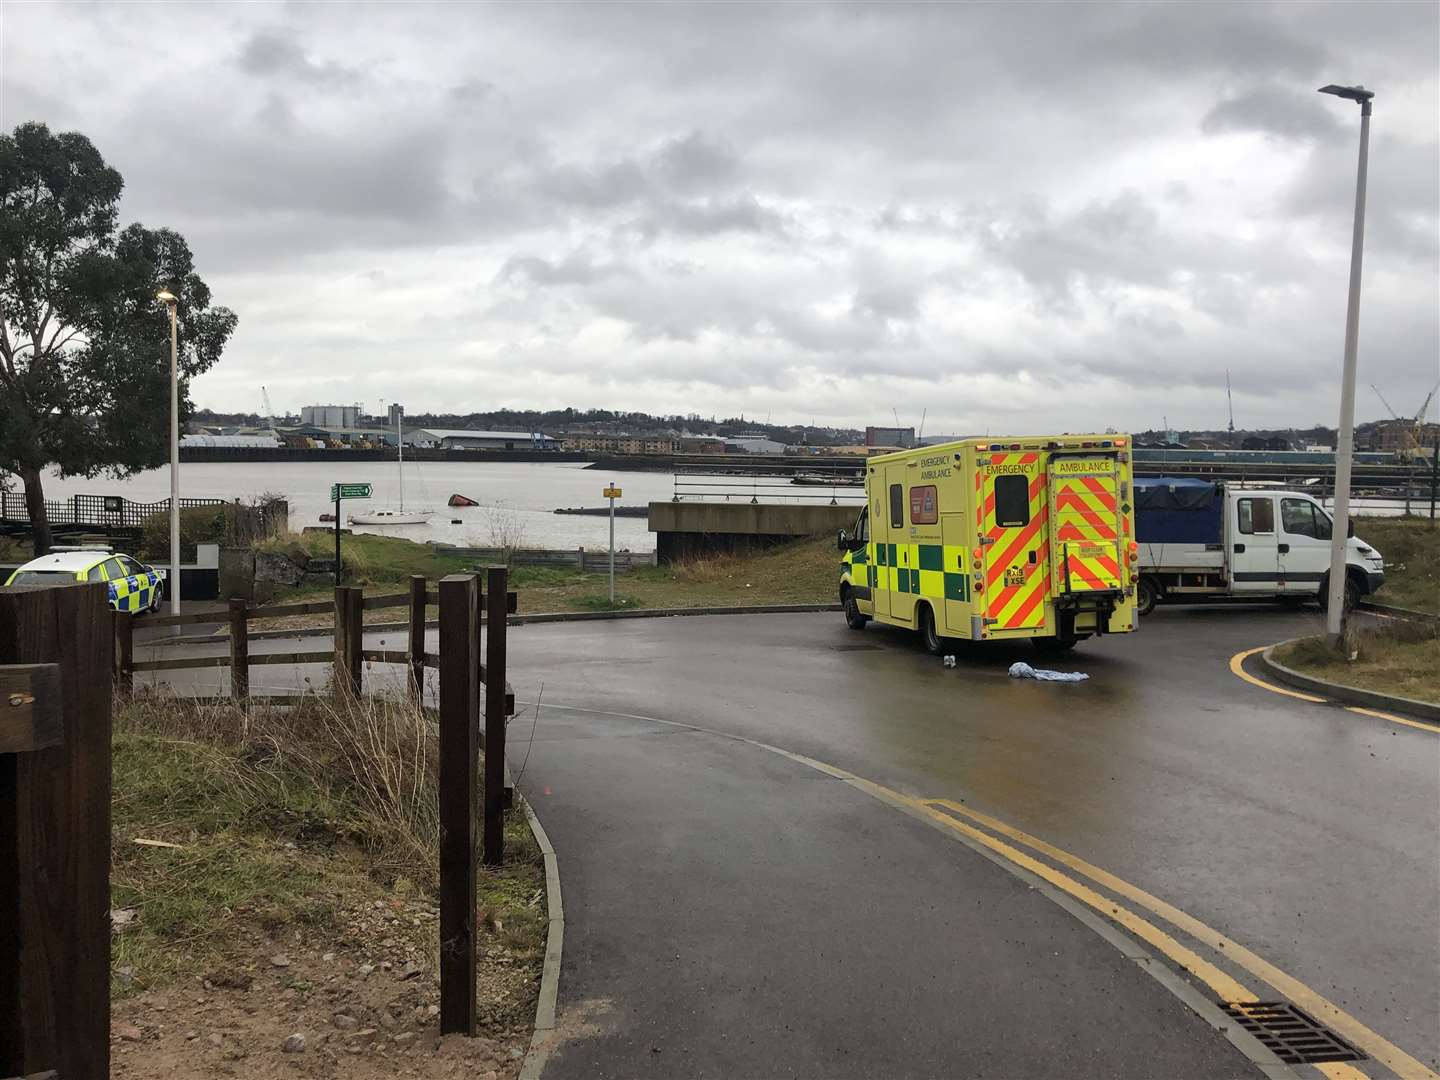 Police and paramedics were spotted outside The Boat House